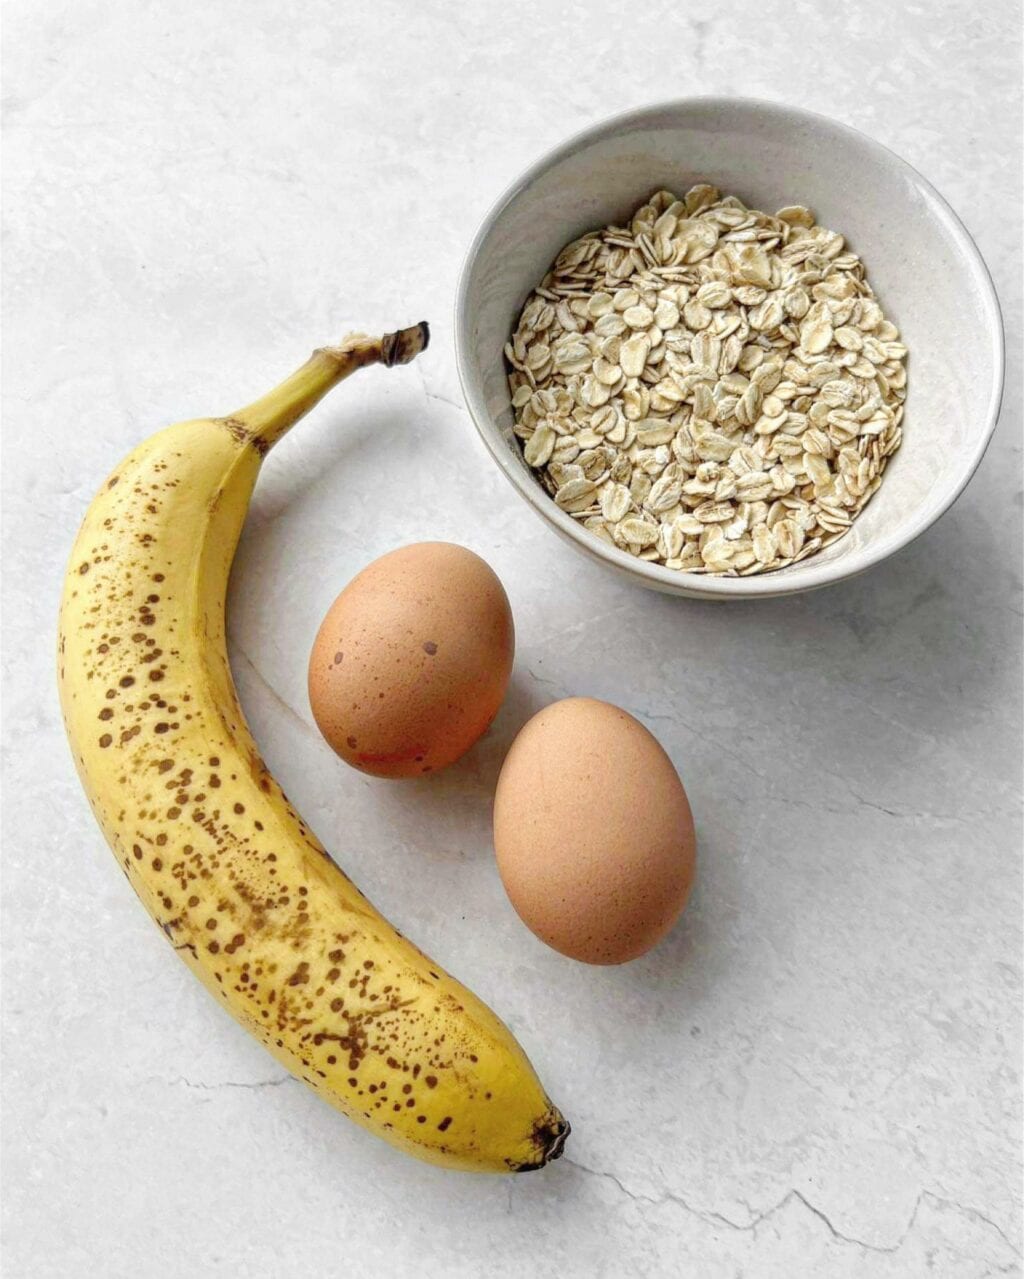 Ingredients for banana oat pancakes, including rolled oats, banana and eggs